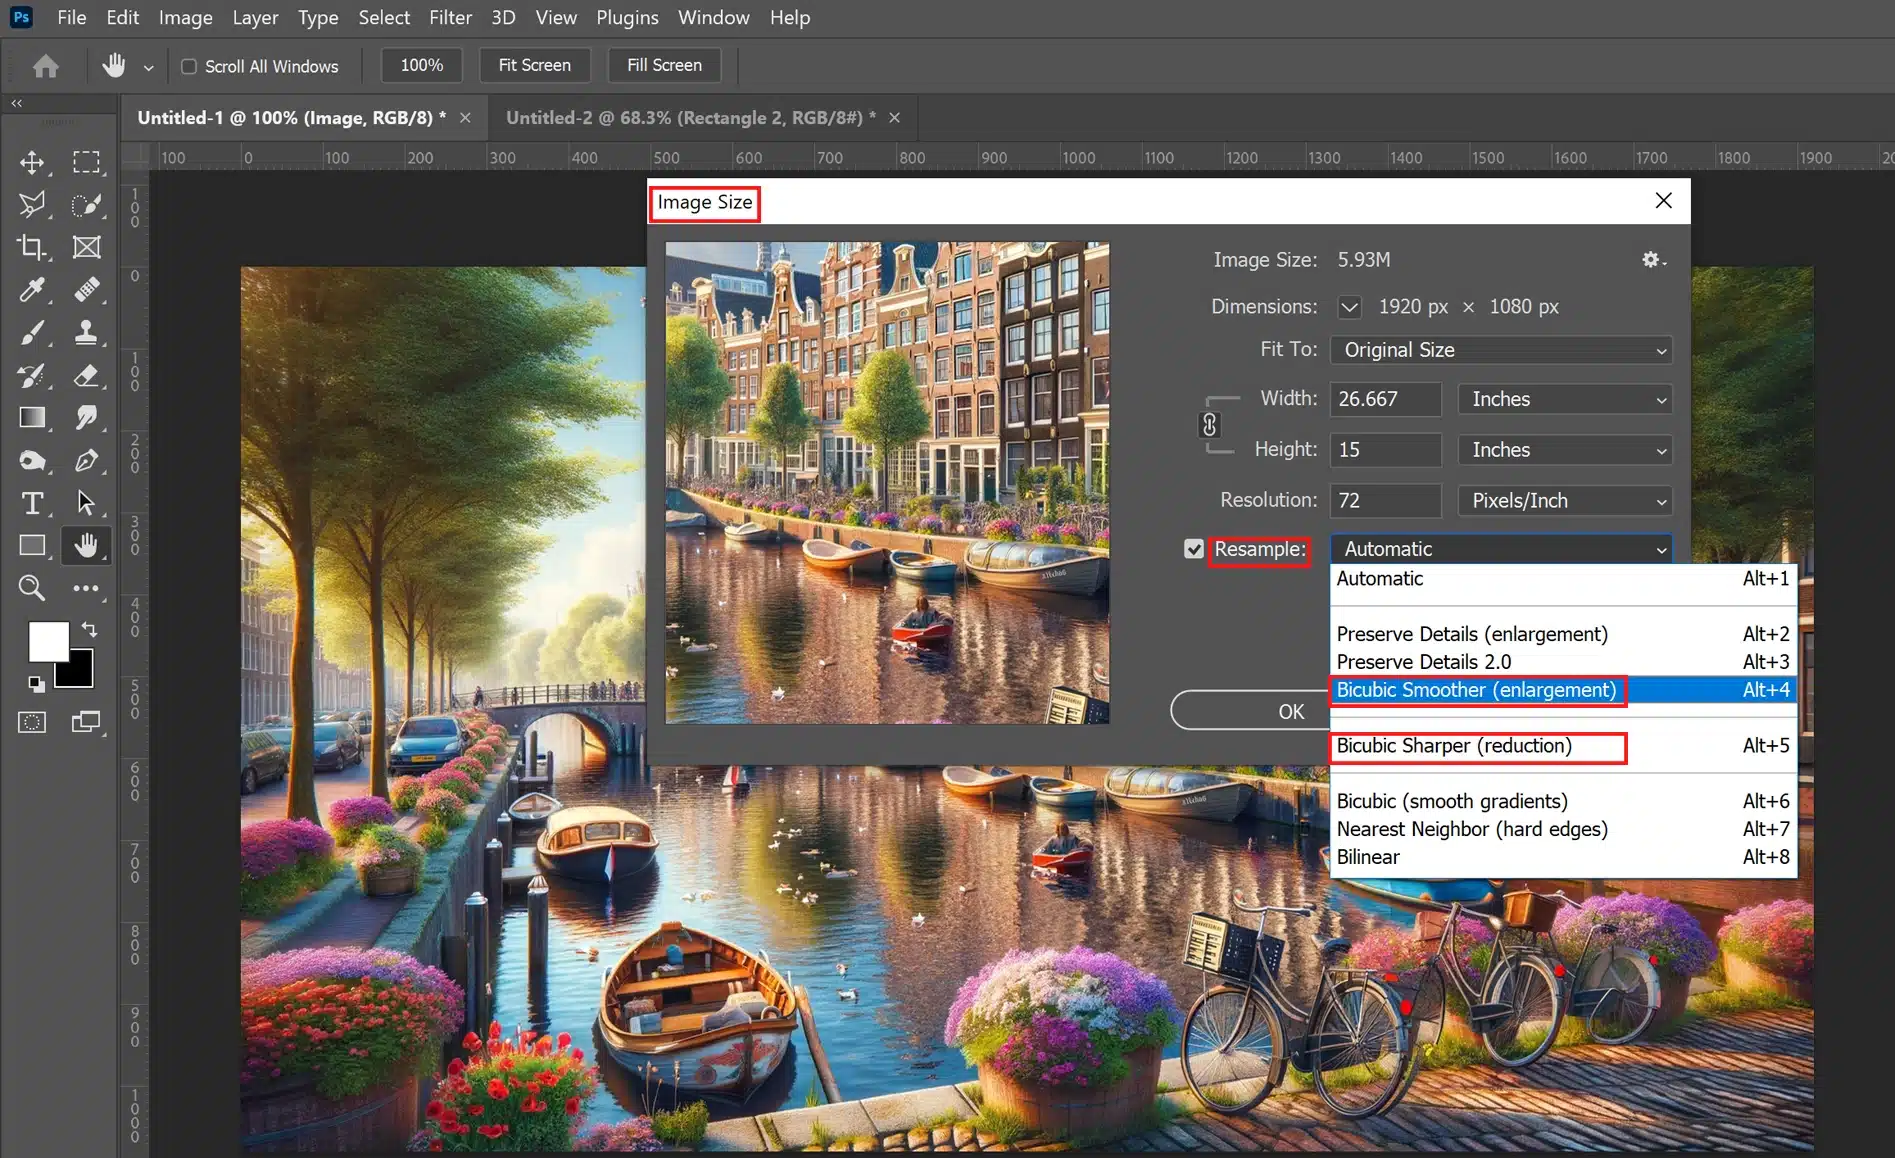 A detailed Photoshop interface displaying a stunning image of Amsterdam's canal, with an image resizing dialog box open showing various resampling options.